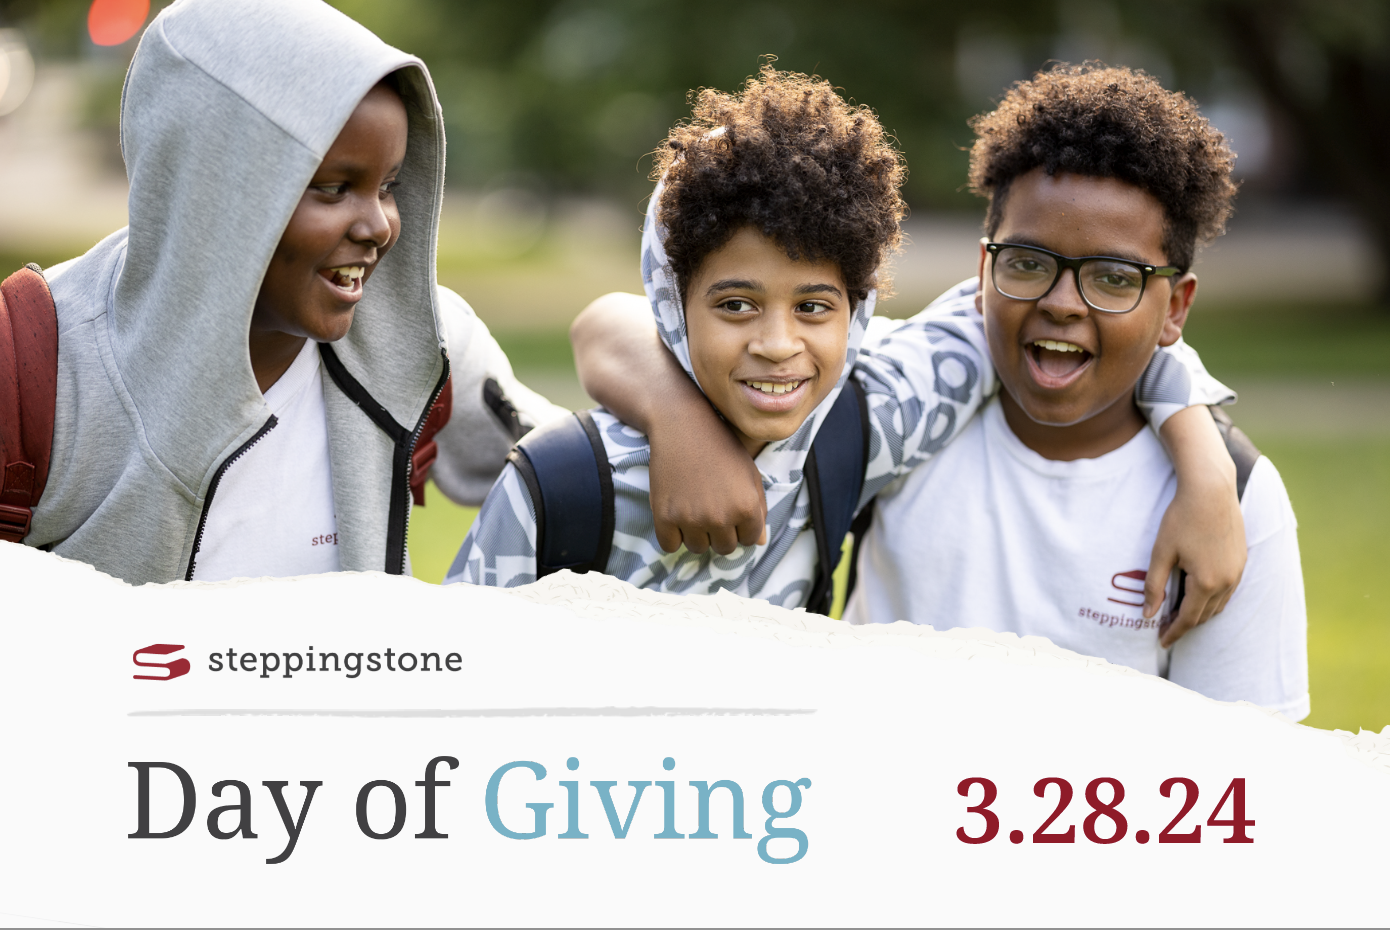 Steppingstone Day of Giving: 3.28.24